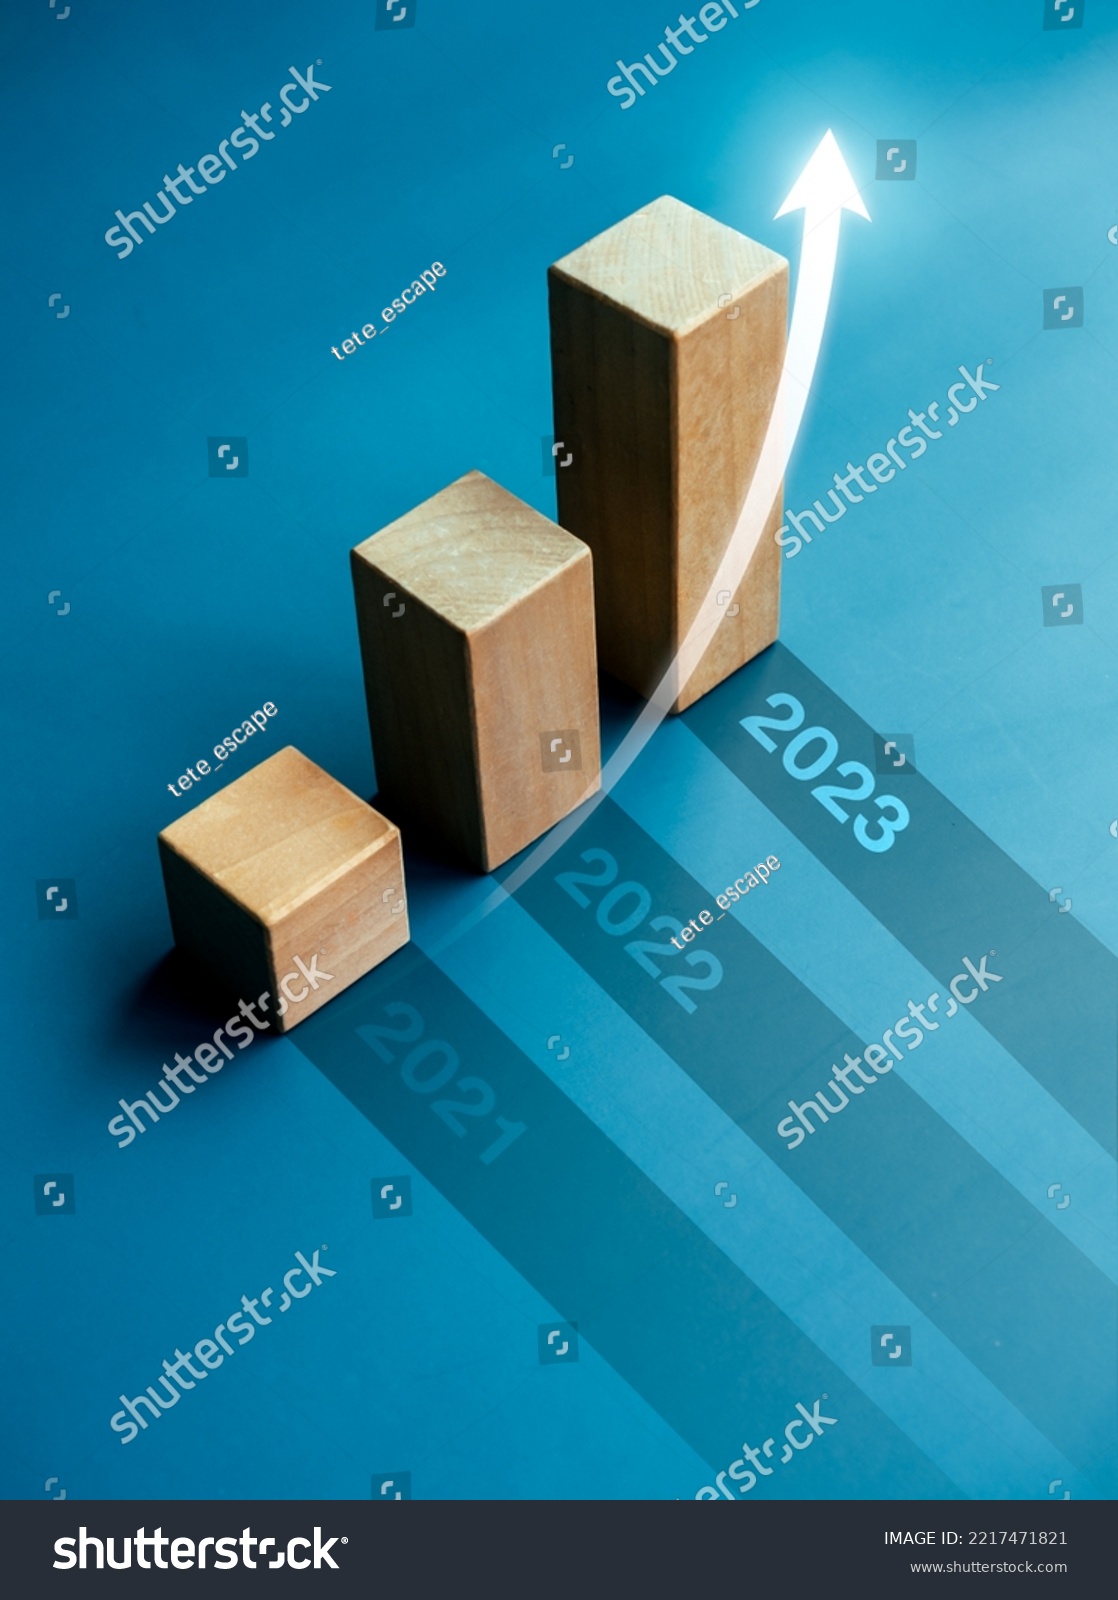 Shining rise up arrow on wooden cube blocks, bar graph chart steps on blue background with year numbers, 2023, 2022, 2021, vertical style. Business growth and development to success concepts. #2217471821